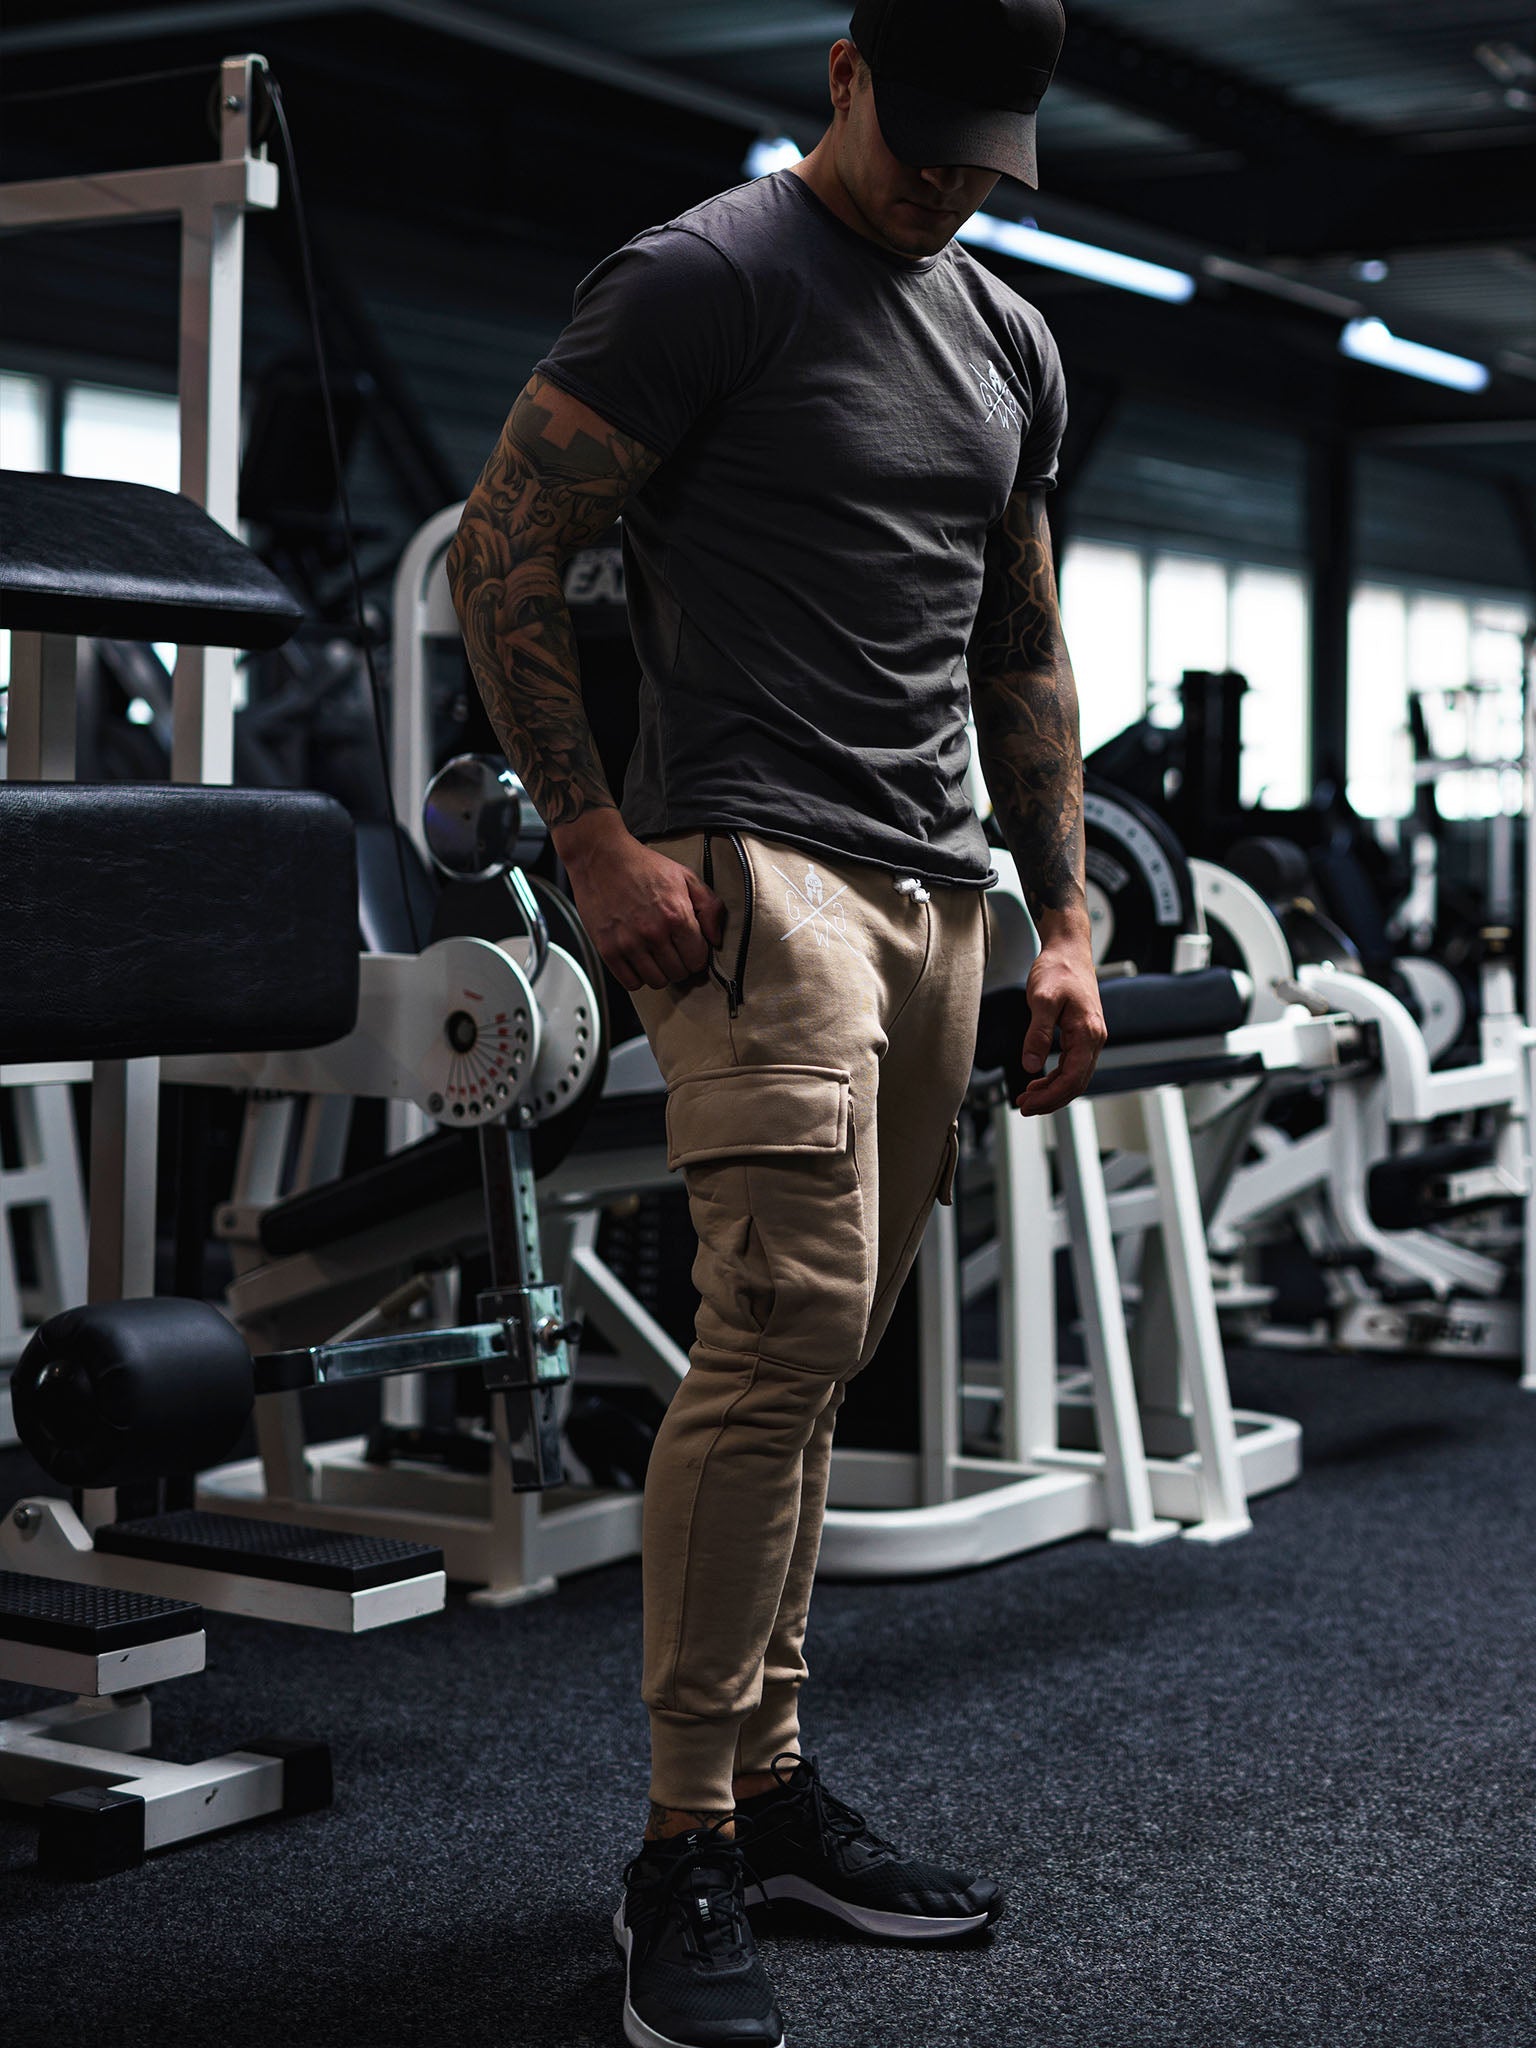 Cargo Pants for Workout & Leisure